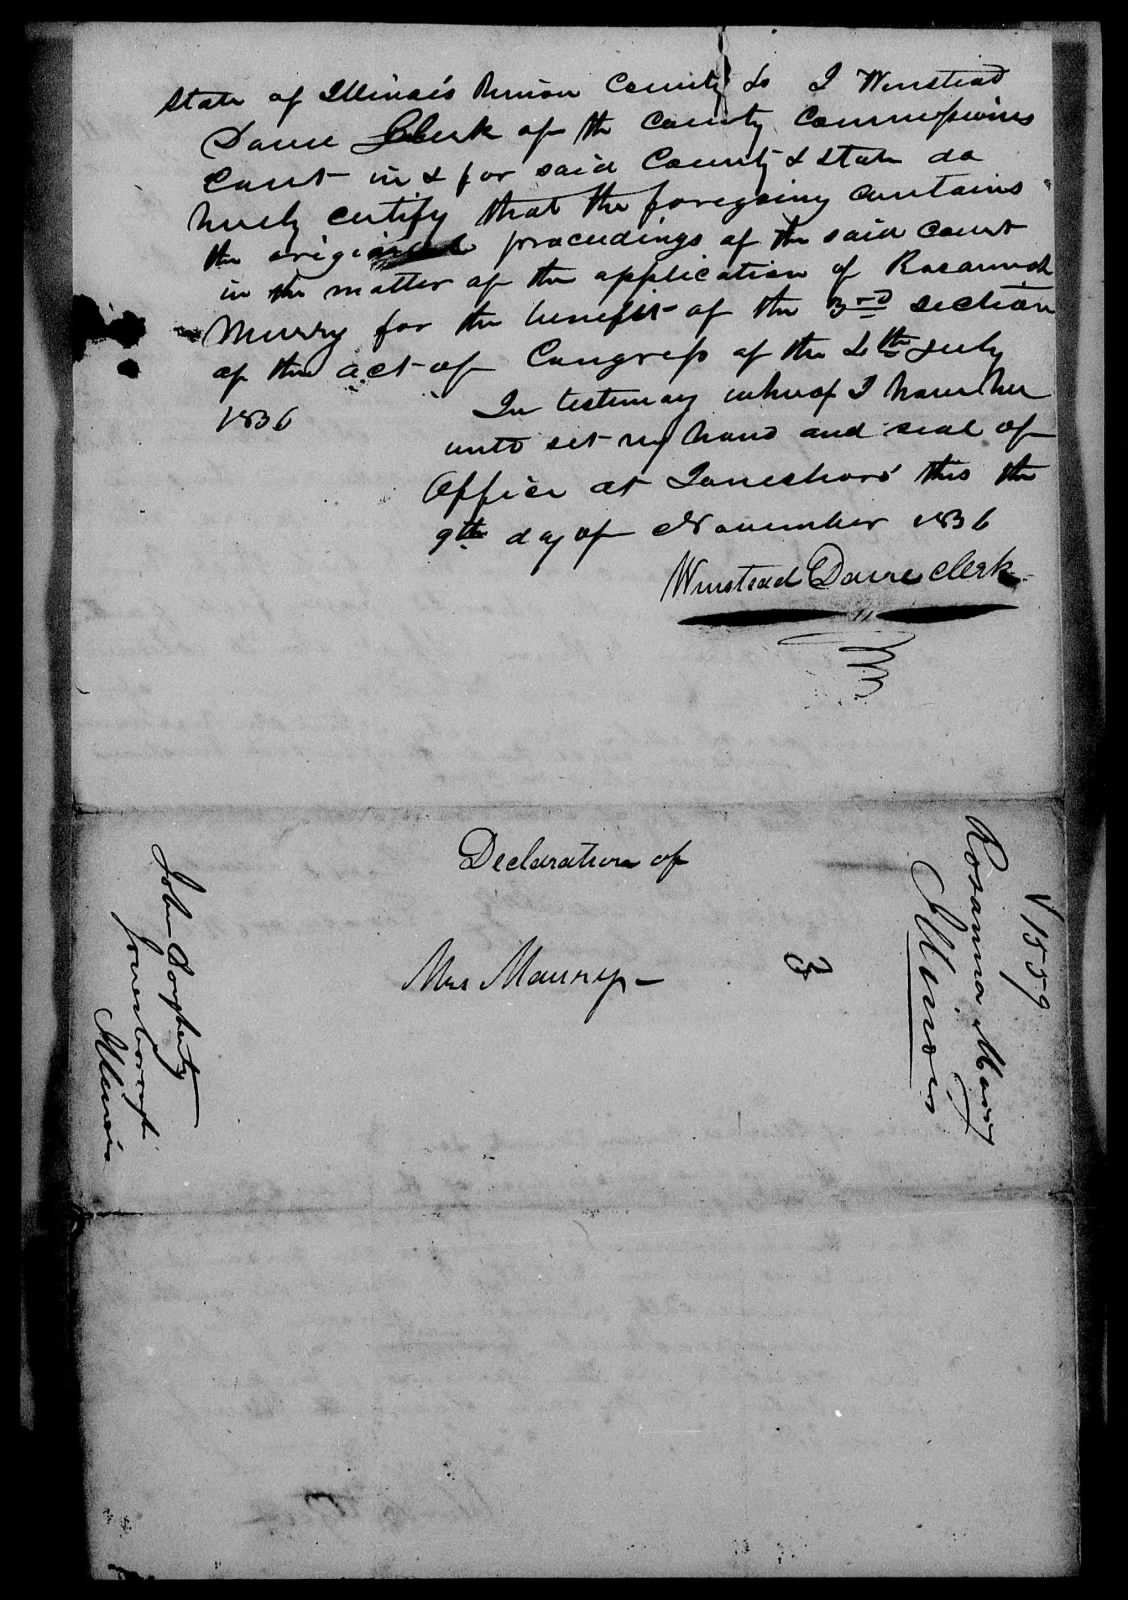 Application for a Widow's Pension from Rosana Murray, 9 November 1836, page 3